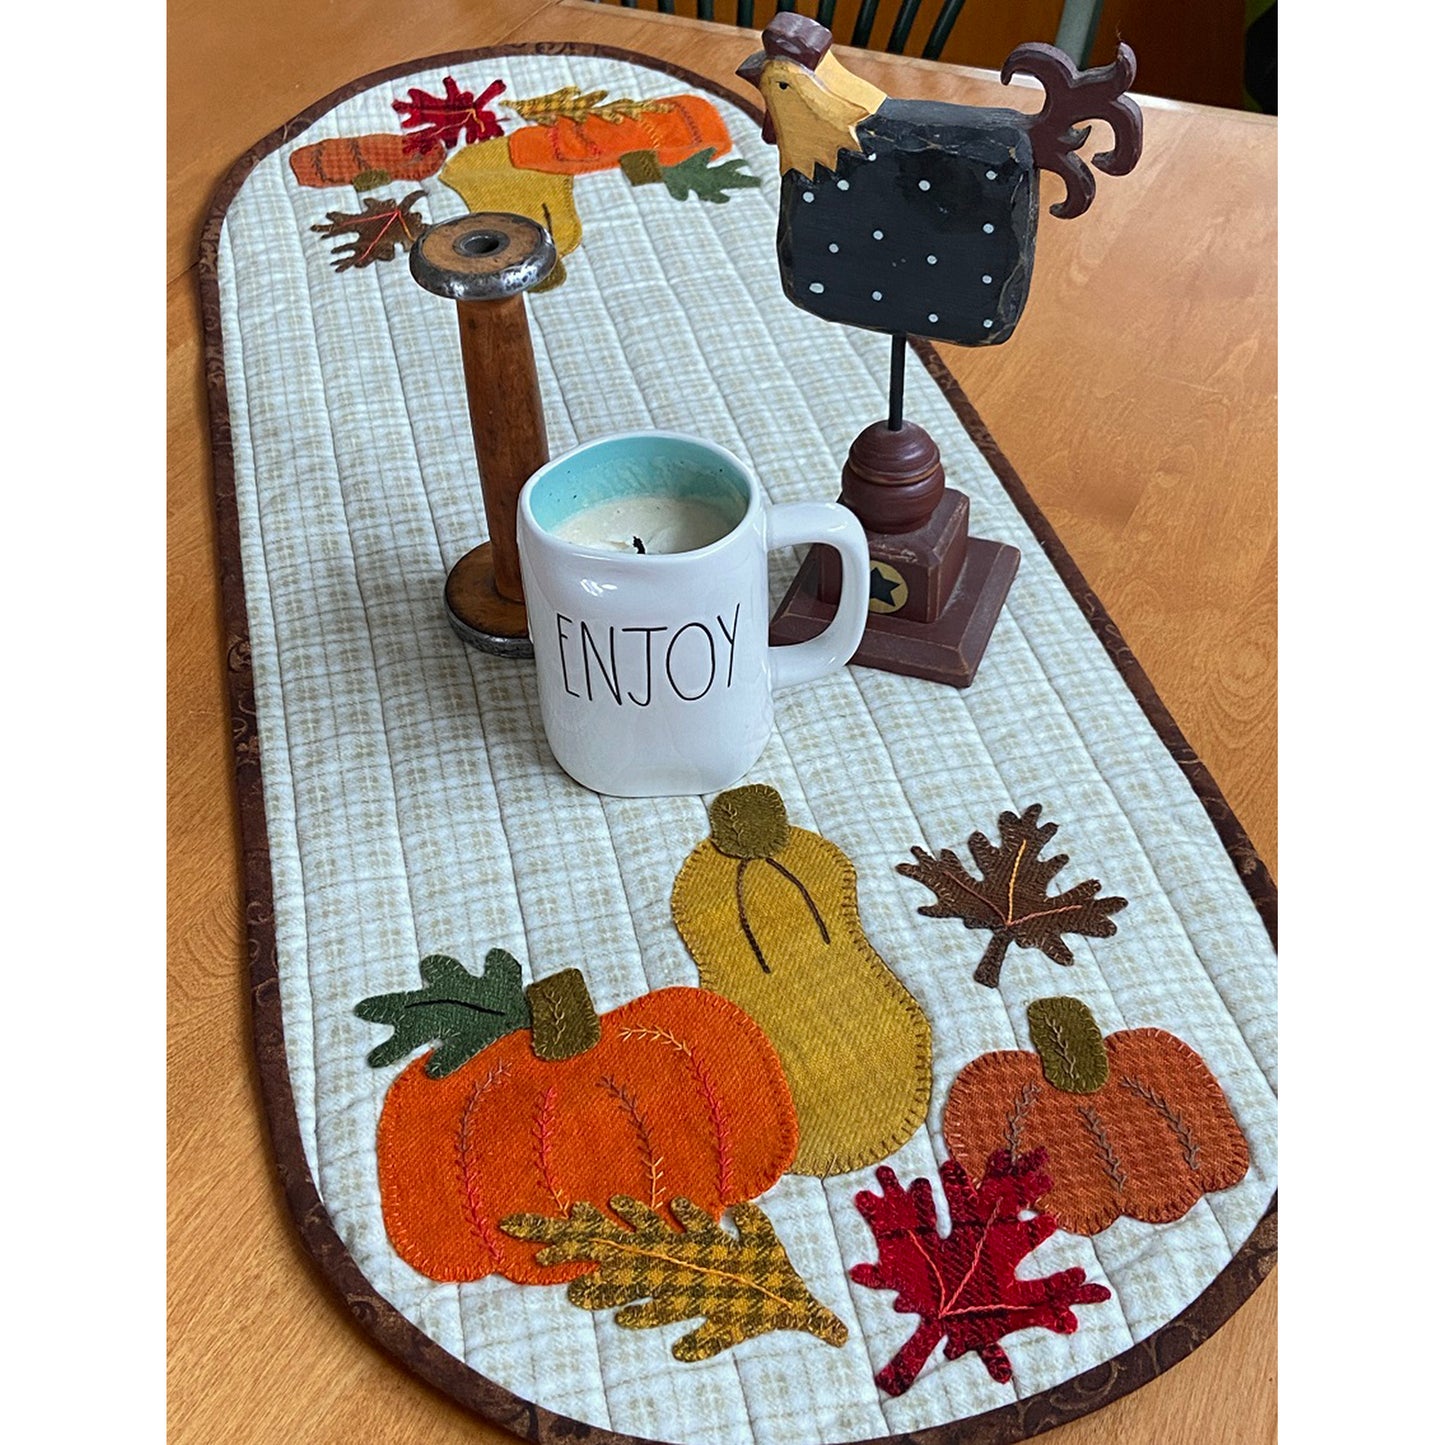 Autumn-themed table runner adorned with pumpkins and leaves.